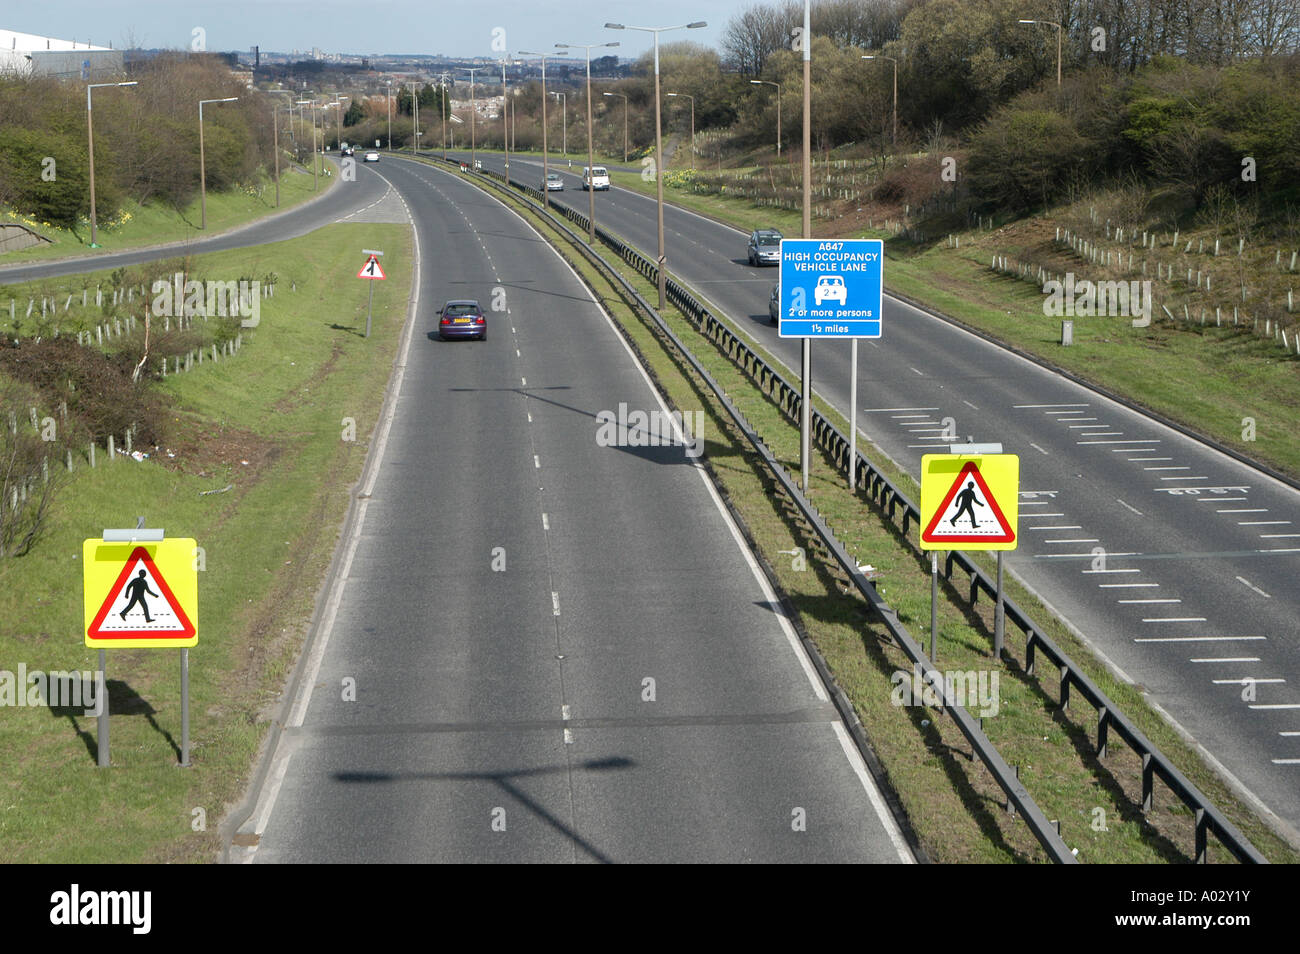 High occupancy vehicle lane sign to encourage car sharing among commuting drivers in the uk Stock Photo